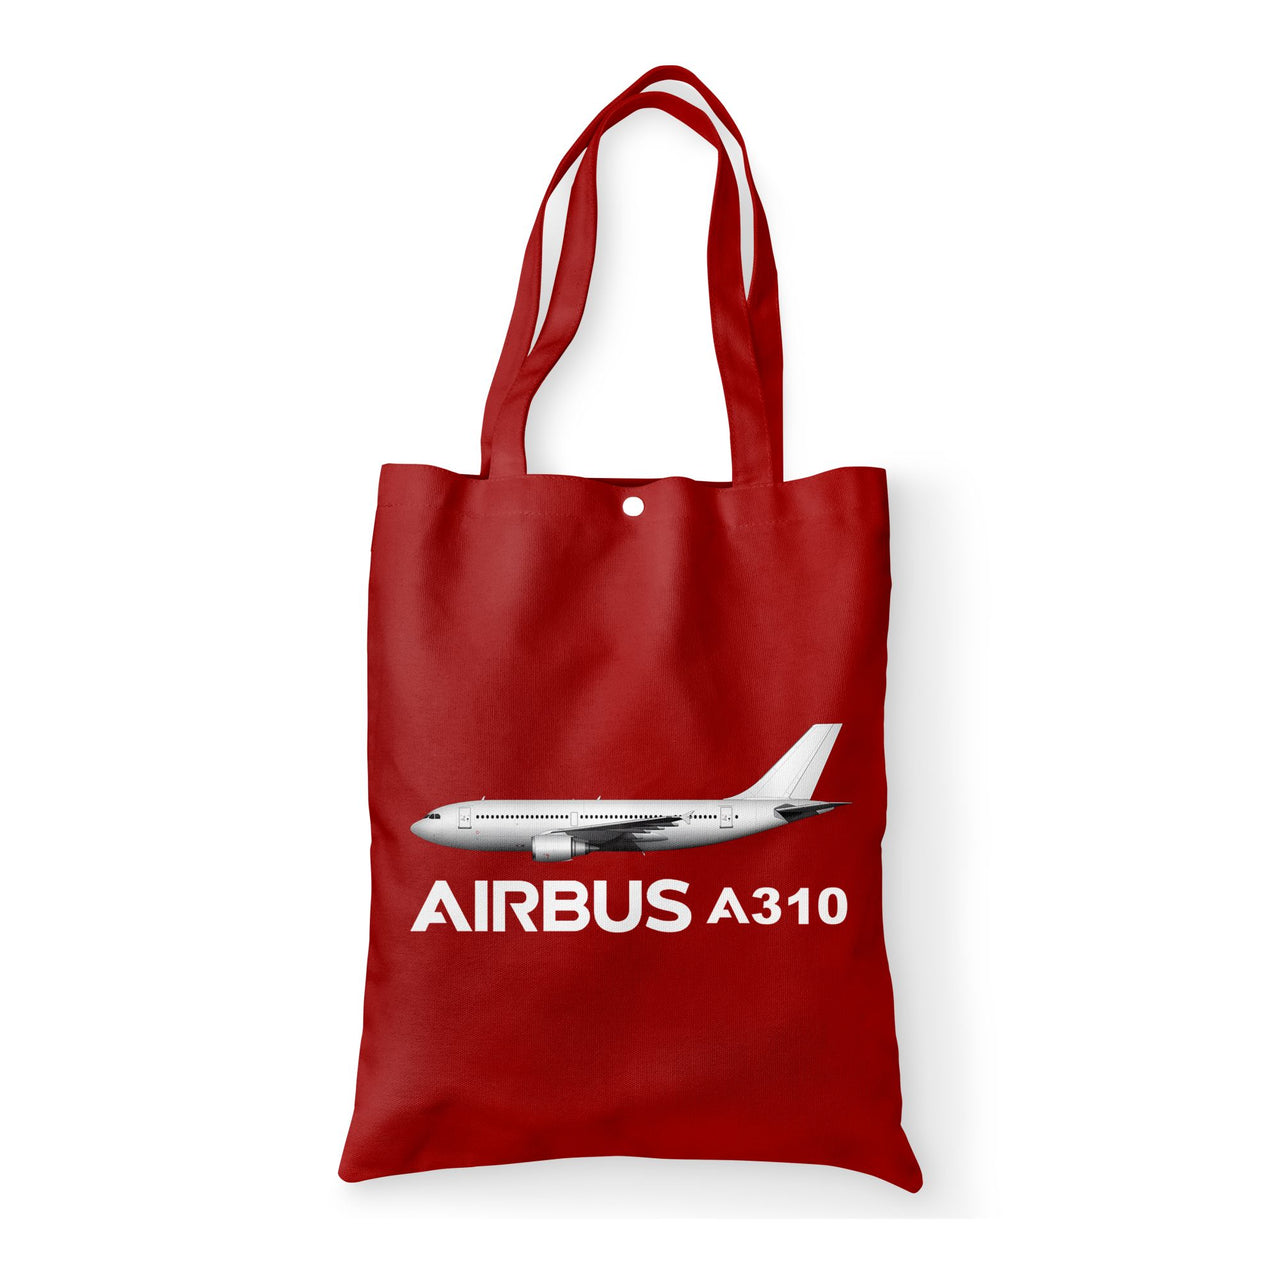 The Airbus A310 Designed Tote Bags